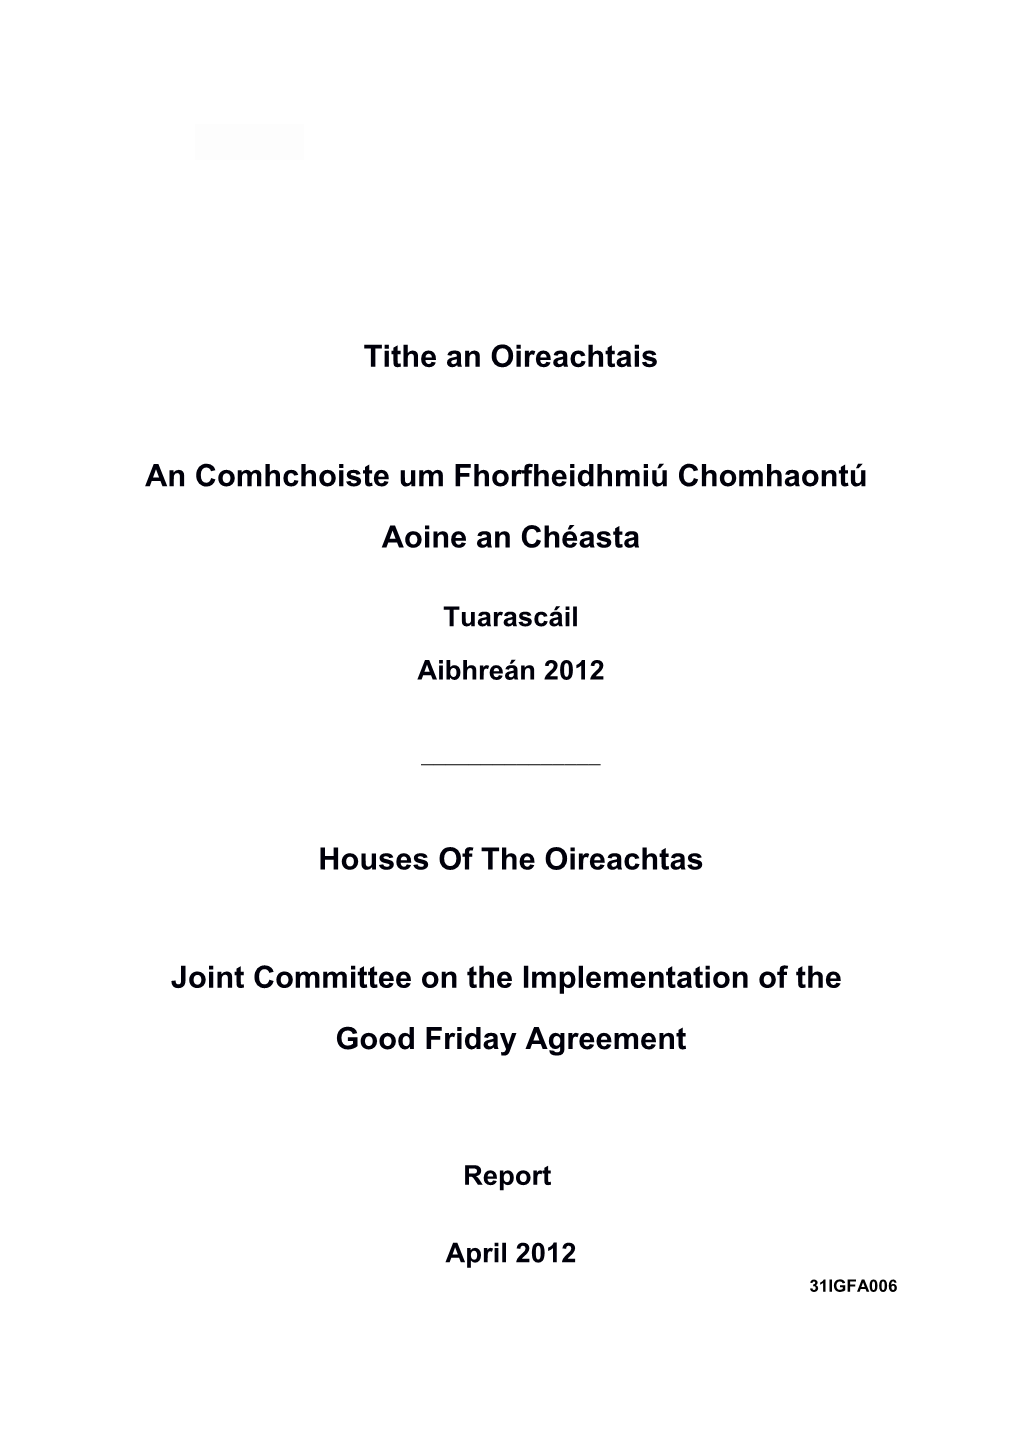 Joint Committee on the Implementation of The